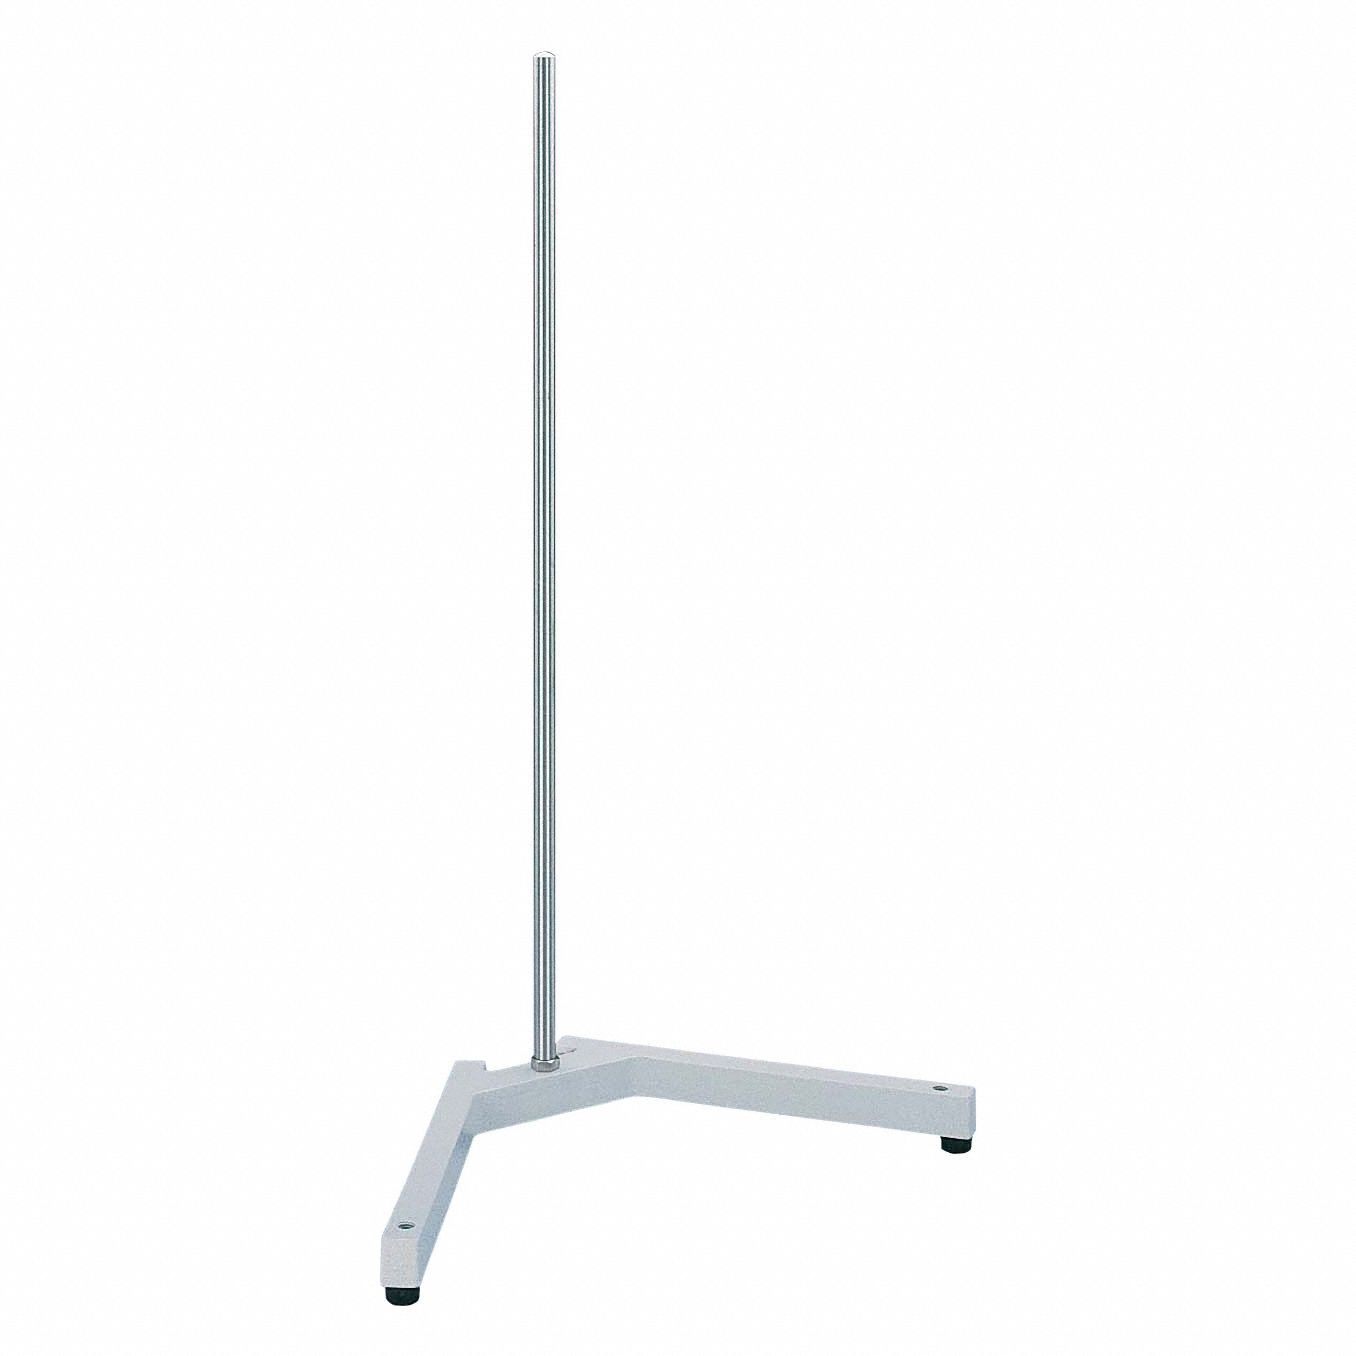 Mixer Support Stand: Support, Stand, 11.75 in Lg, 0.63 in Dia, 11.75 in Base Lg